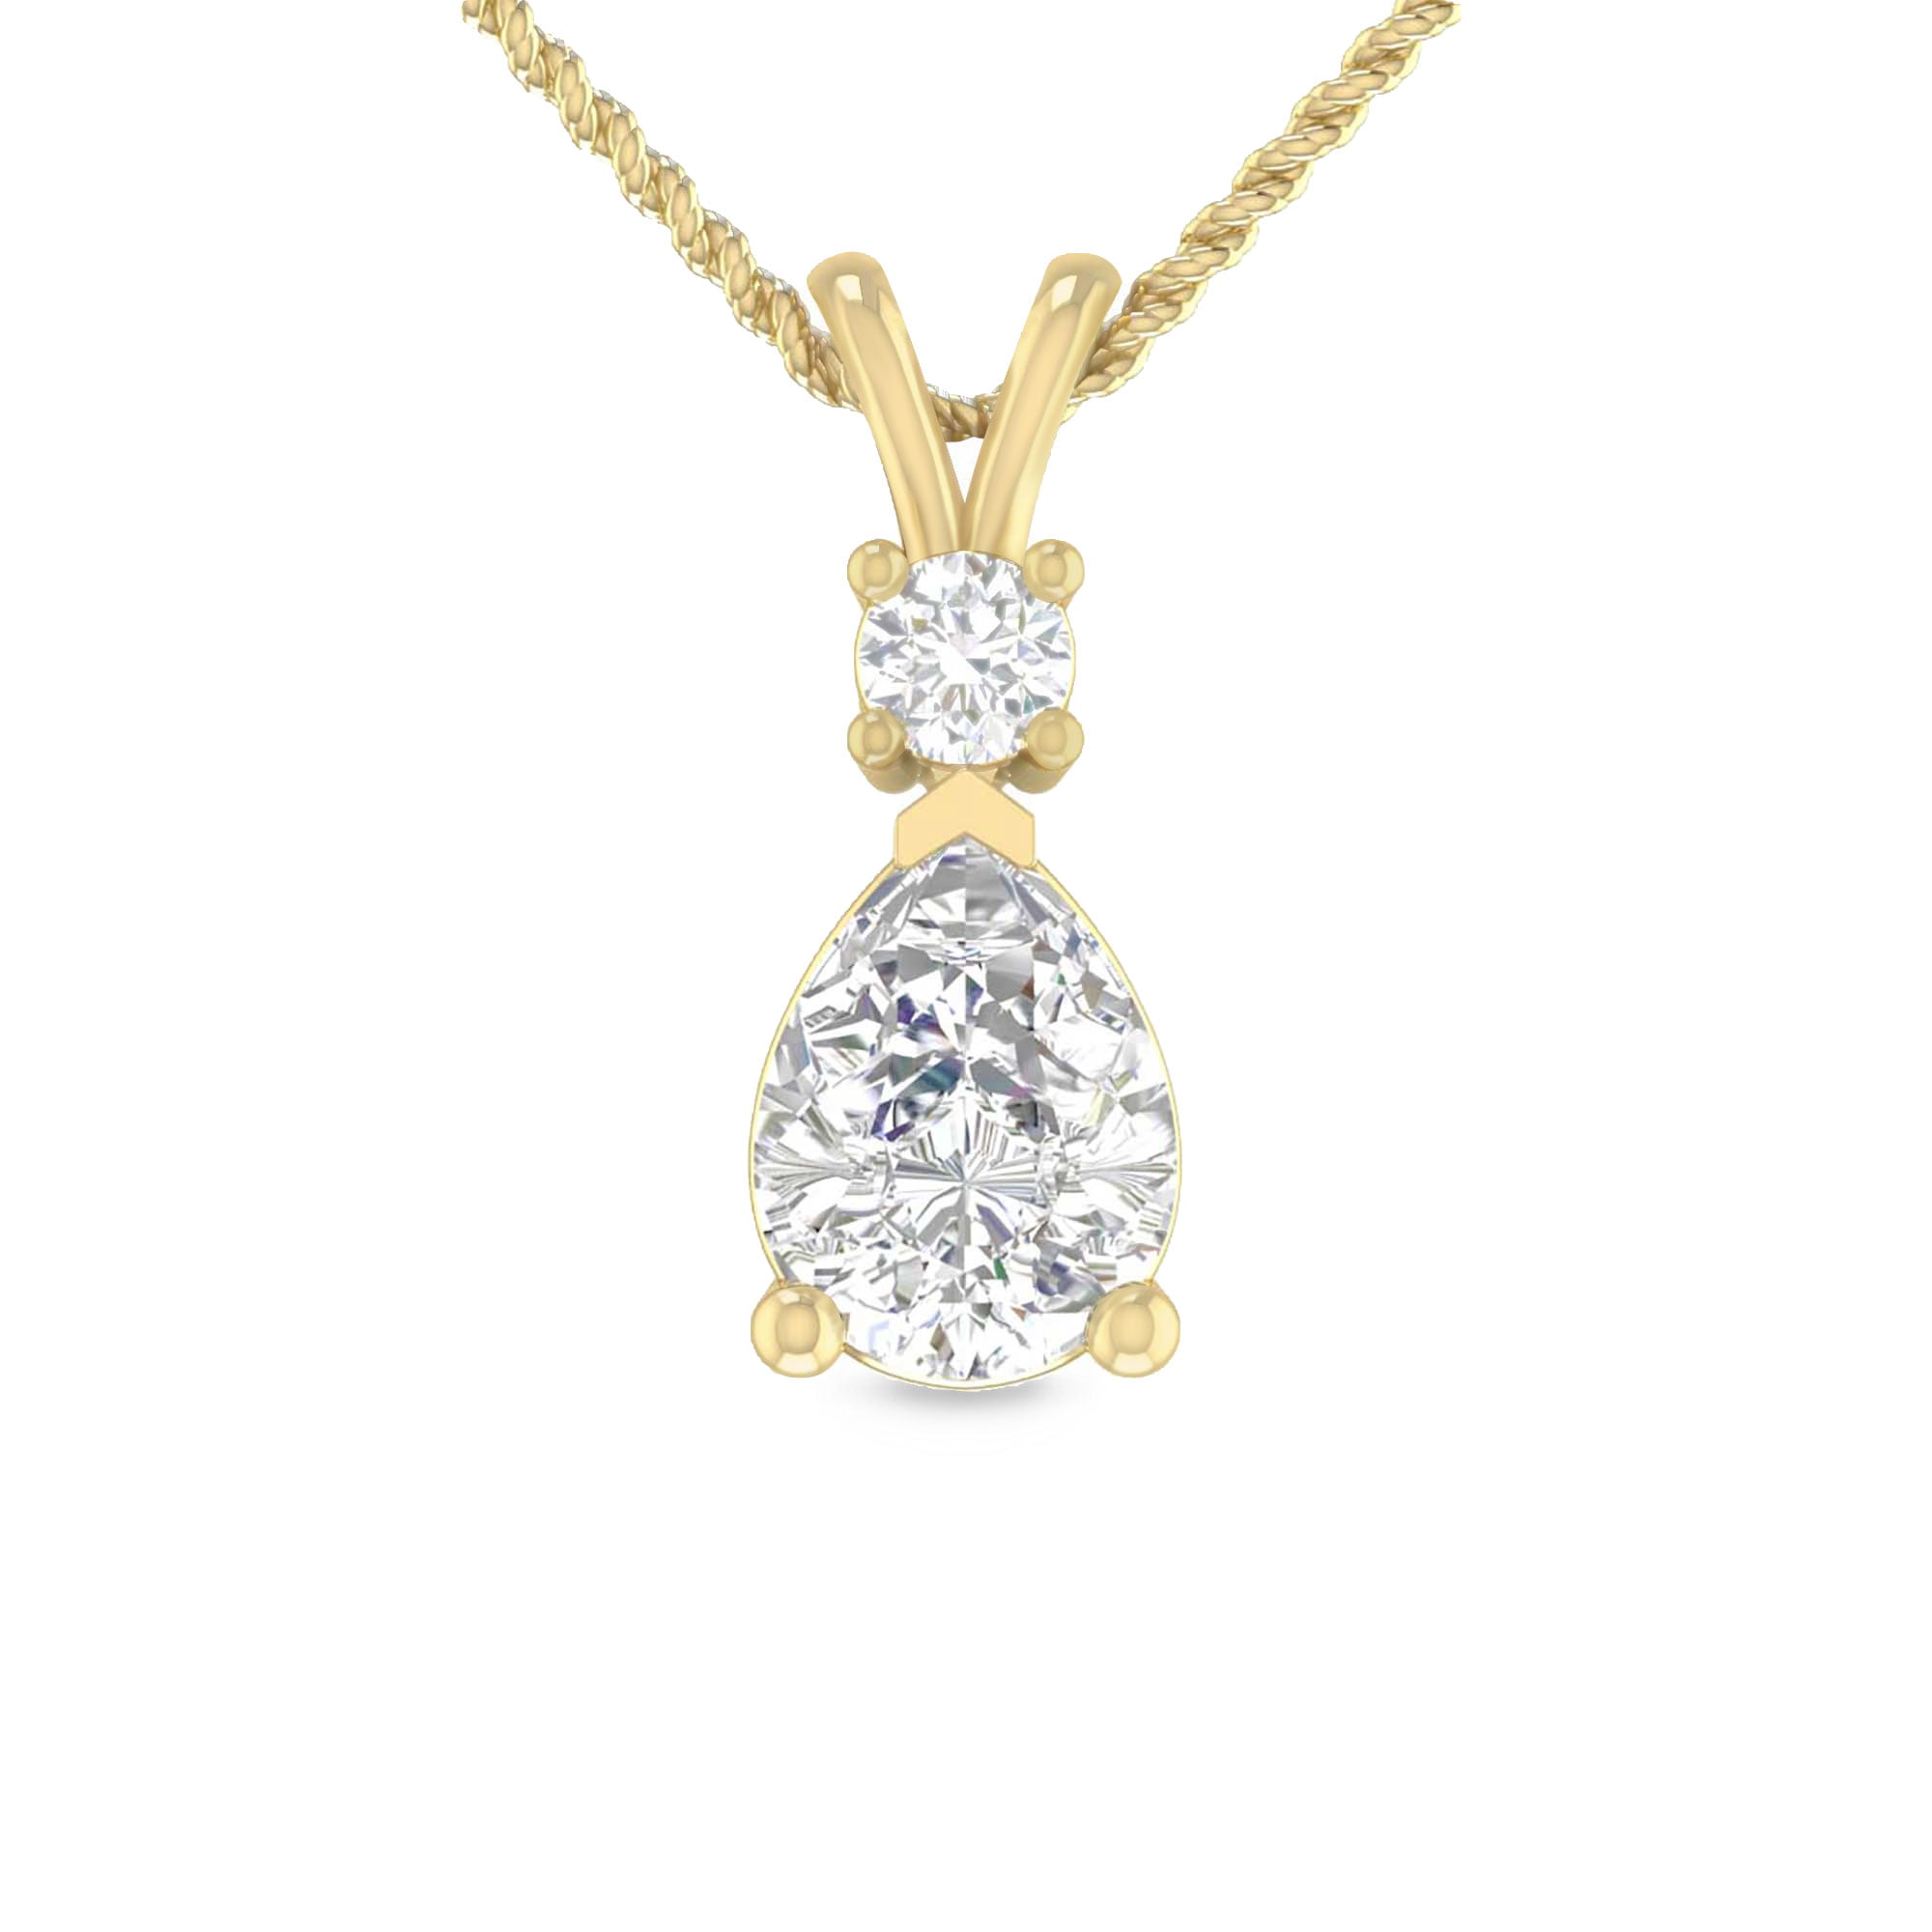 Details about   10k Yellow Gold Pear White Topaz Pendant with 16" Chain